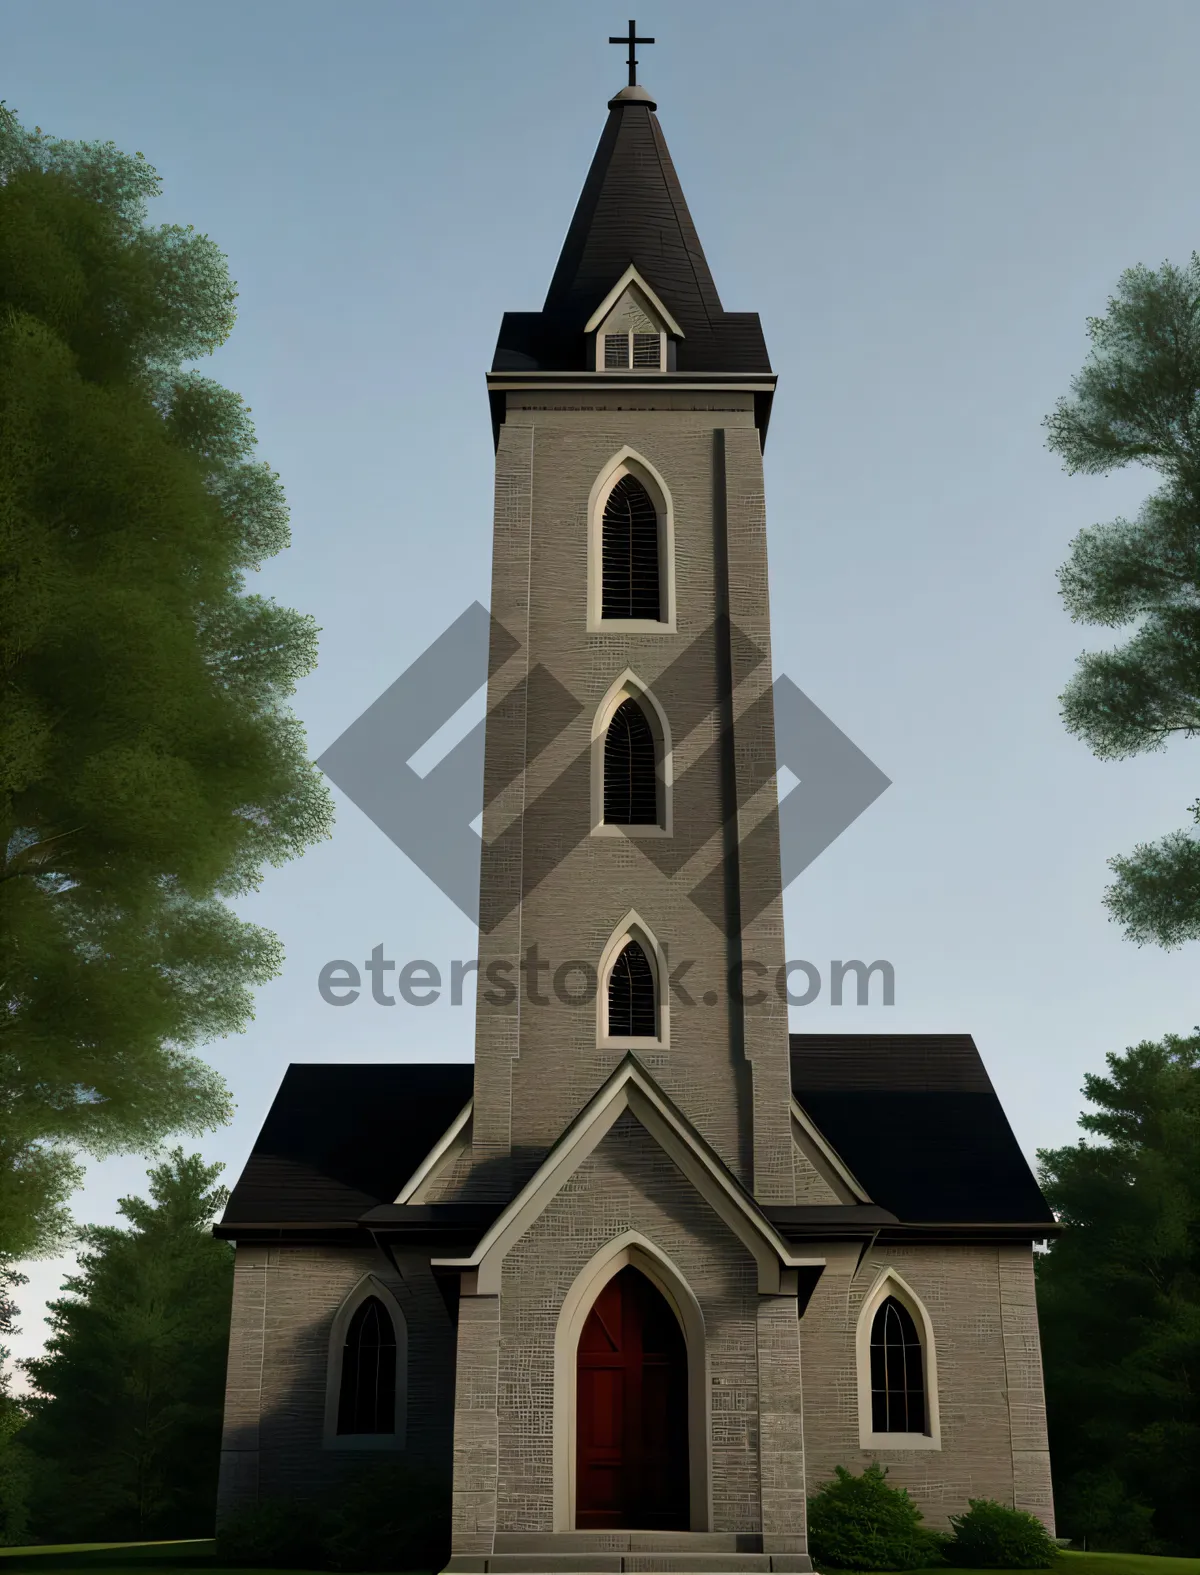 Picture of The bell tower of a historic church, situated in a city known for its grand cathedrals, resonating with echoes of the past